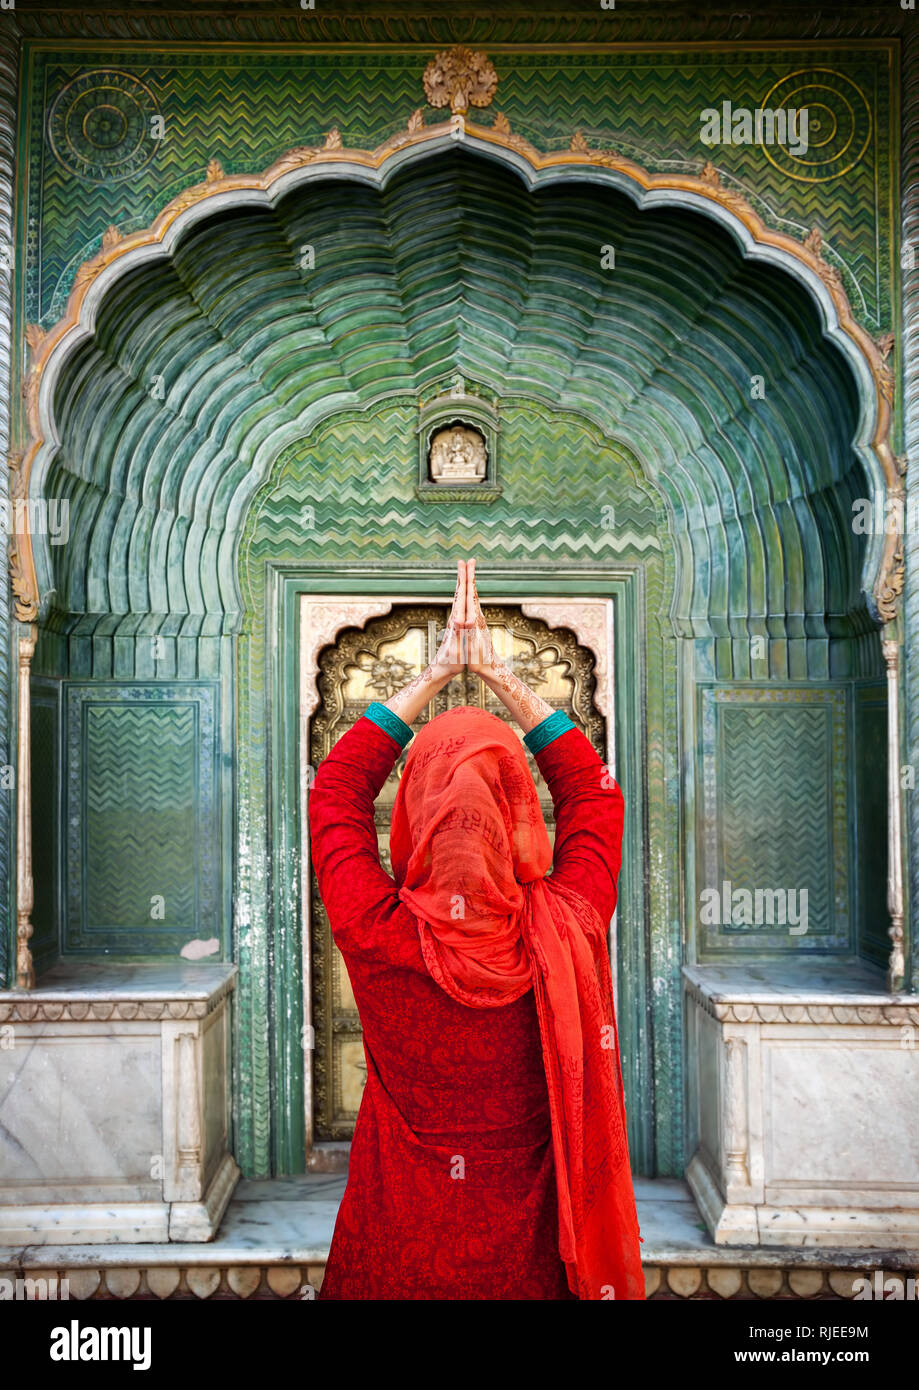 Indian Woman in red scarf with hands in prayer gesture at green gate door in City Palace of Jaipur, Rajasthan, India. Space for your text, can be used Stock Photo